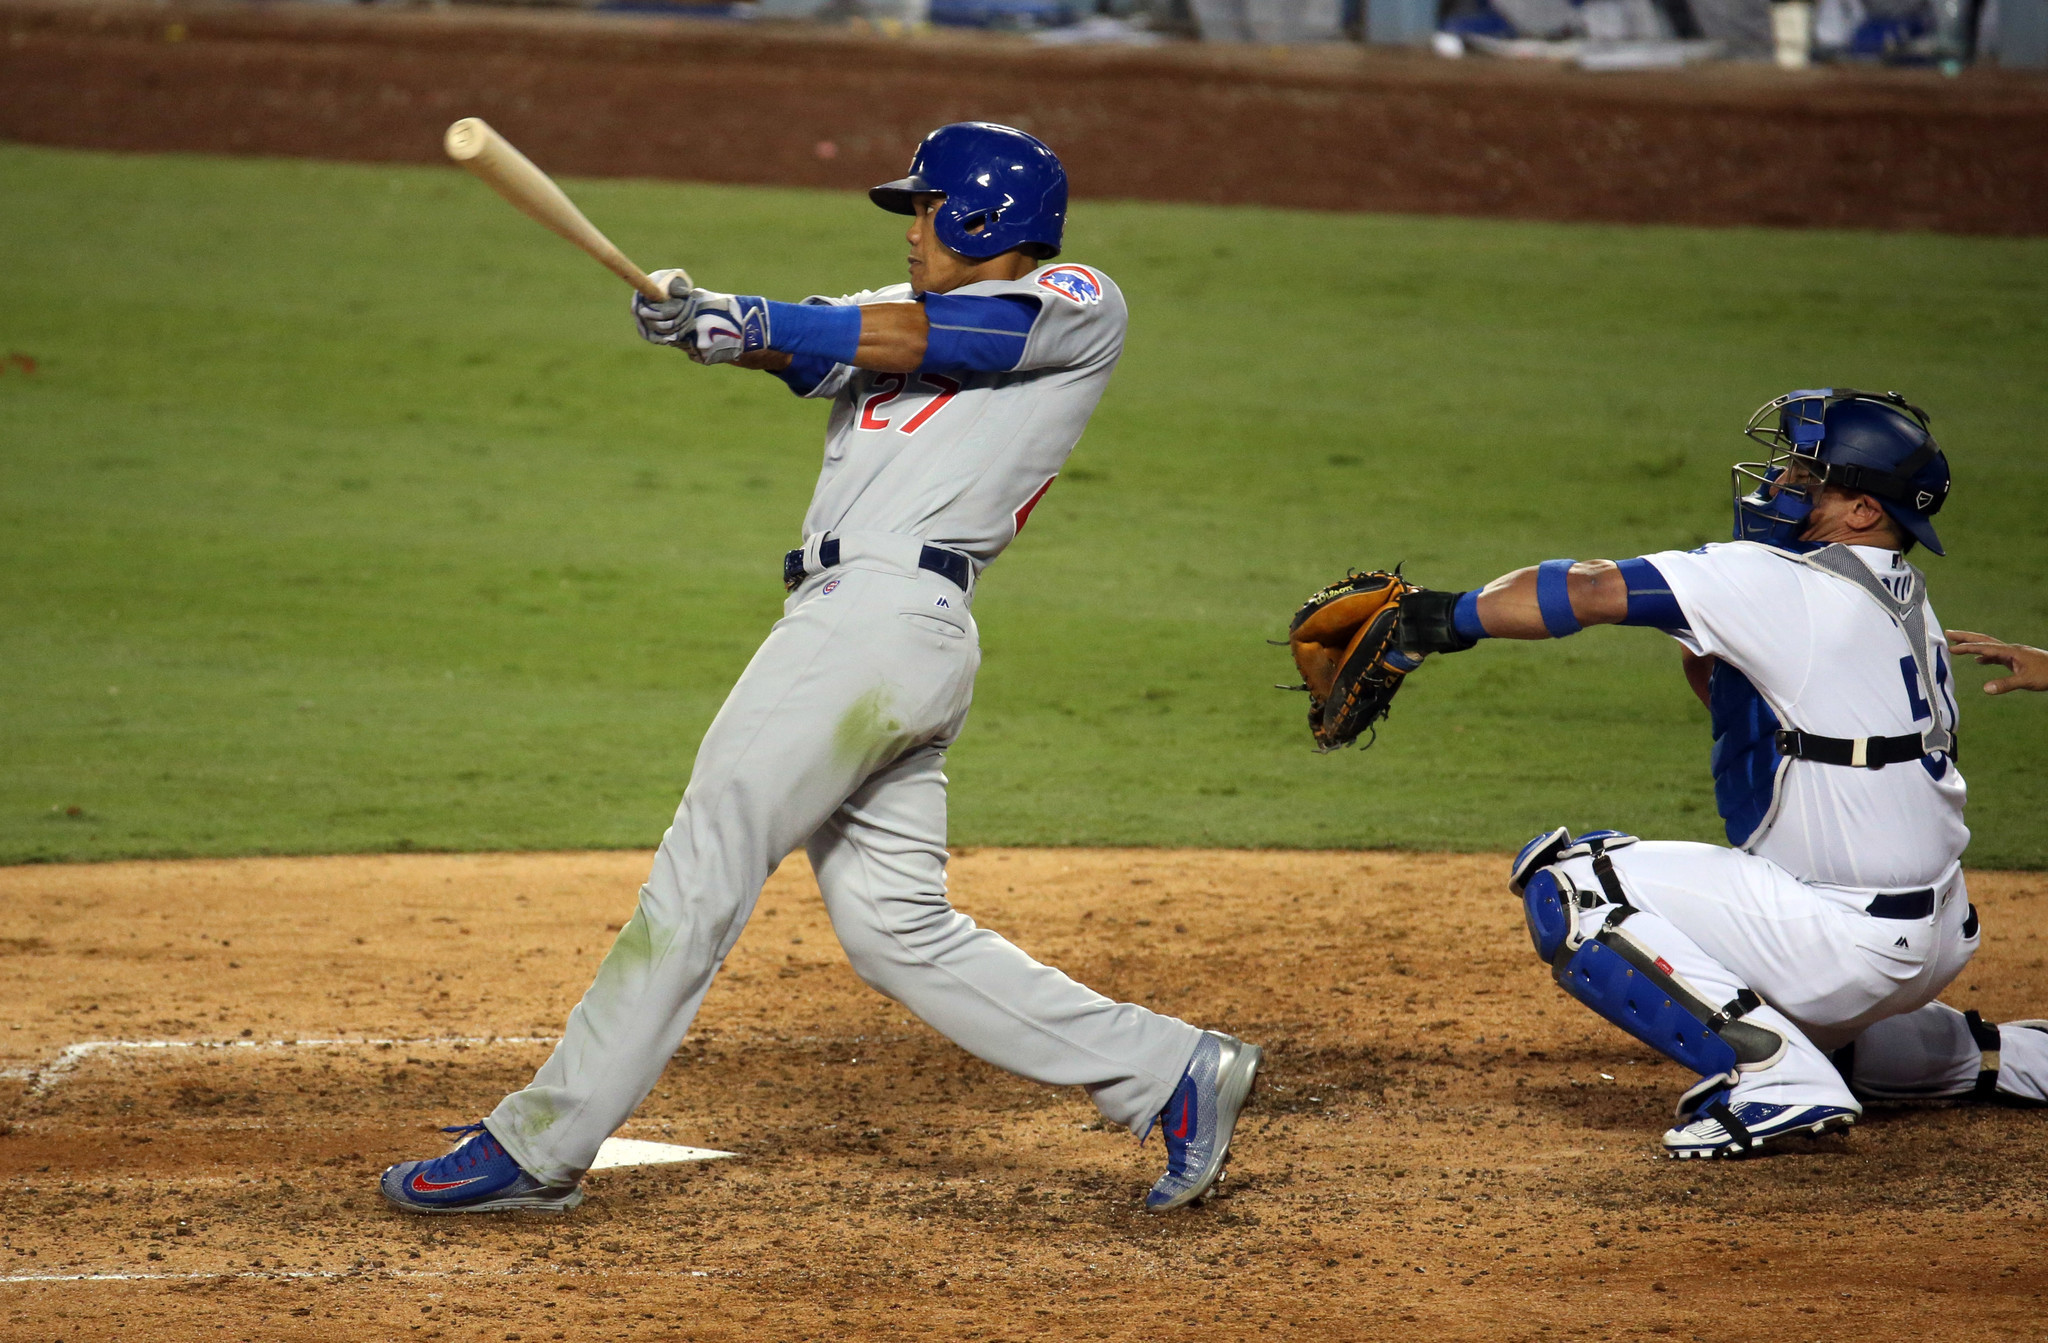 NLCS Game 5: Cubs 8, Dodgers 4